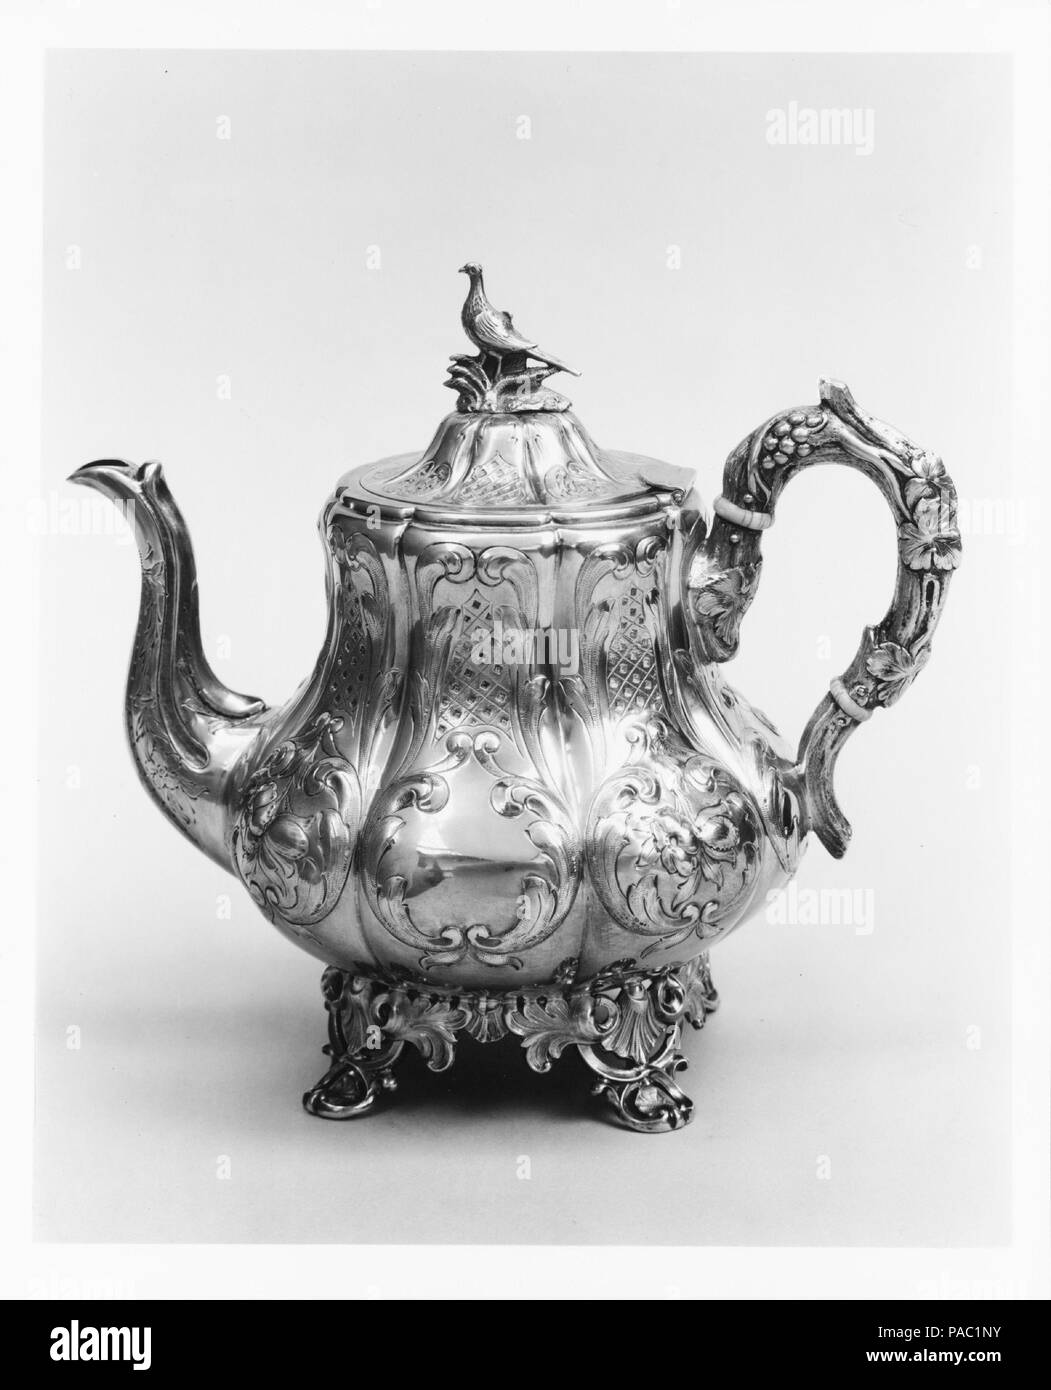 Teapot. Culture: American. Dimensions: 8 5/8 x 9 7/16 x 6 1/4 in. (21.9 x 24 x 15.9 cm); 28 oz. 15 dwt. (894.3 g). Maker: Charters, Cann & Dunn (active 1848-1854). Retailer: Ball, Tompkins and Black (active 1839-51). Date: 1848-51. Museum: Metropolitan Museum of Art, New York, USA. Stock Photo